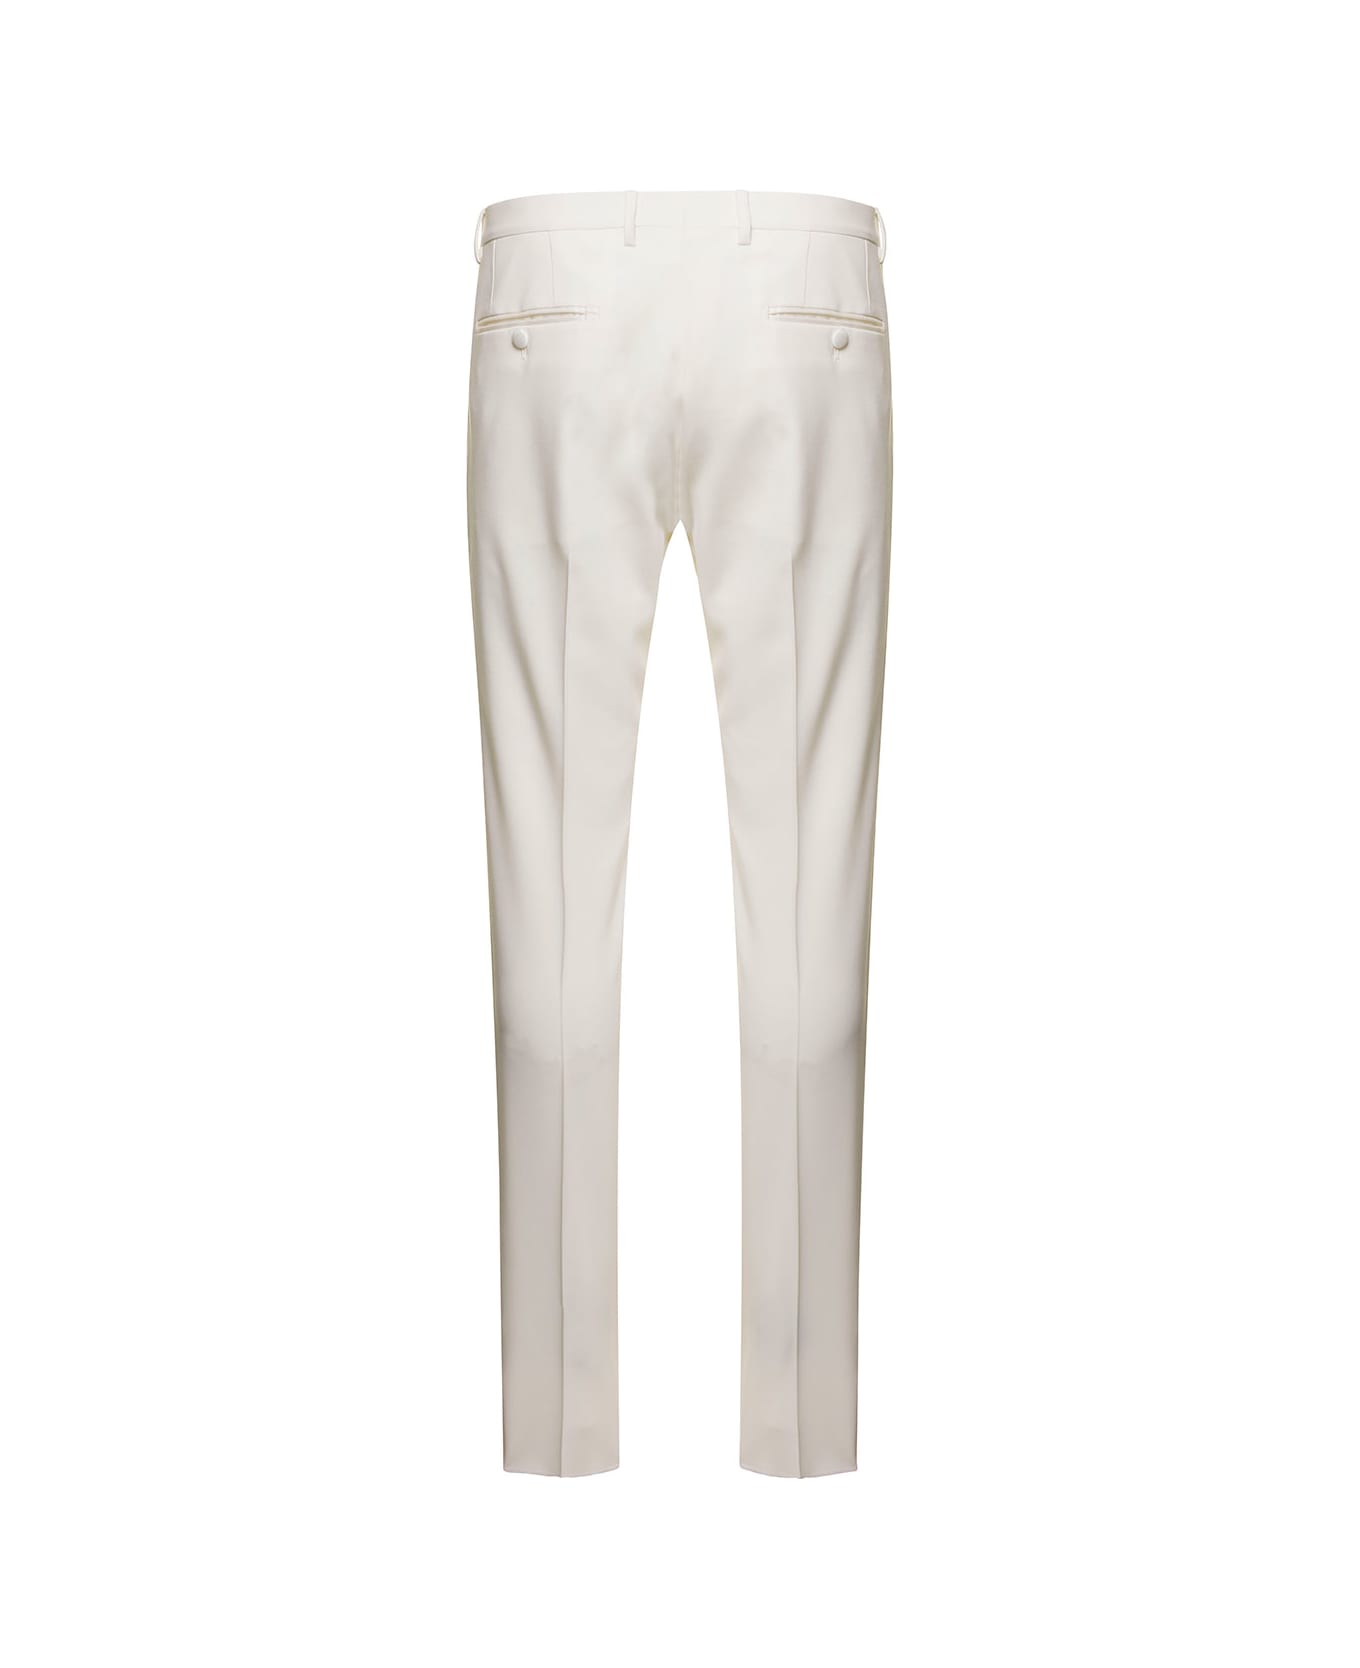 Dolce & Gabbana White Slim Pants With Covered Button In Wool And Silk Blend Man - White